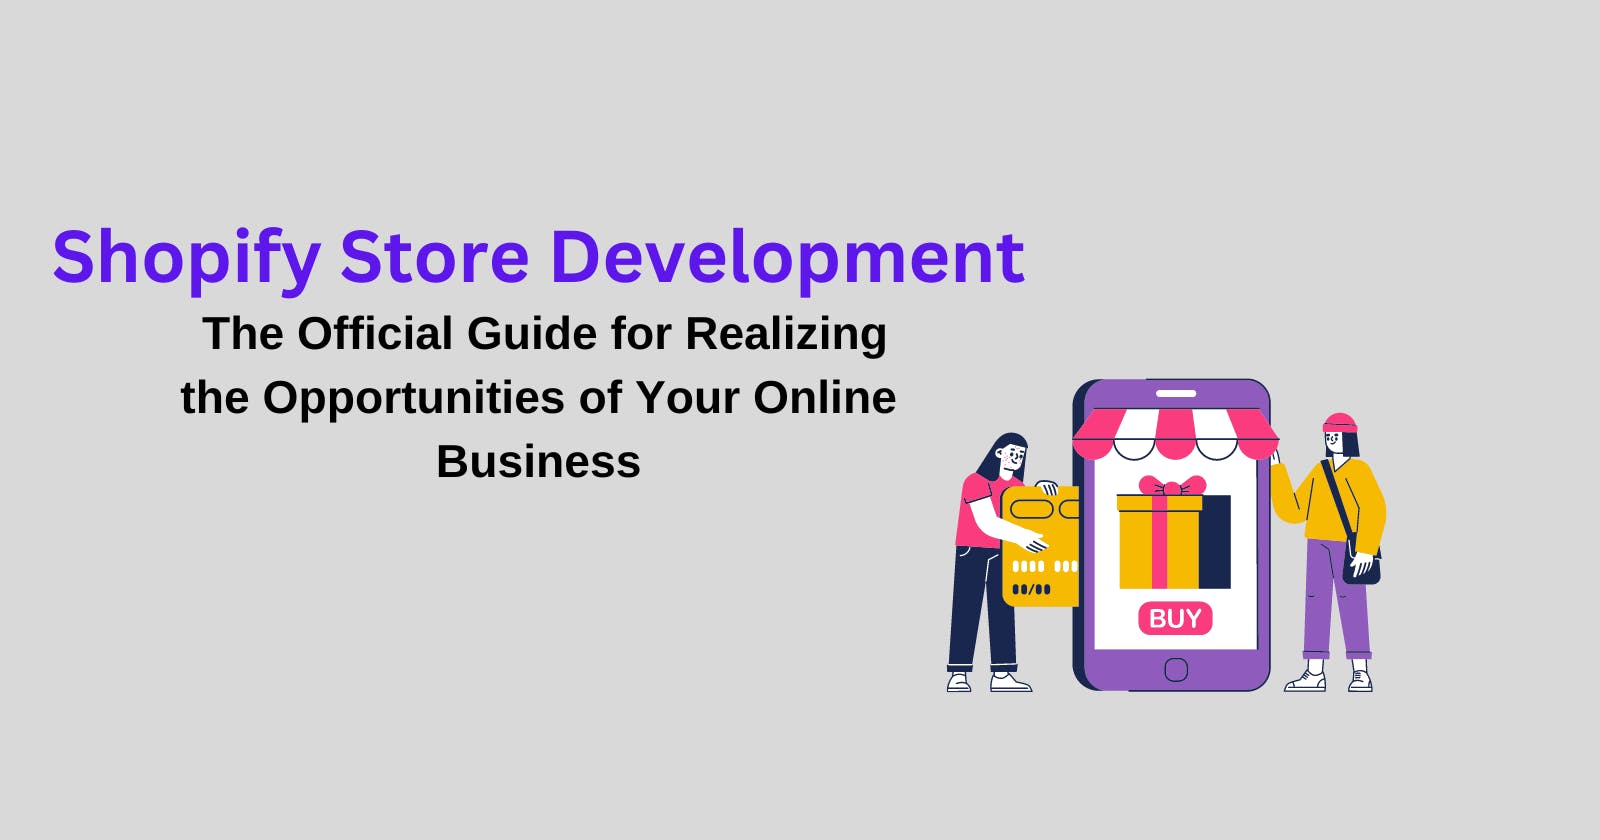 Mastering Shopify Store Development: The Official Guide for Realizing the Opportunities of Your Online Business